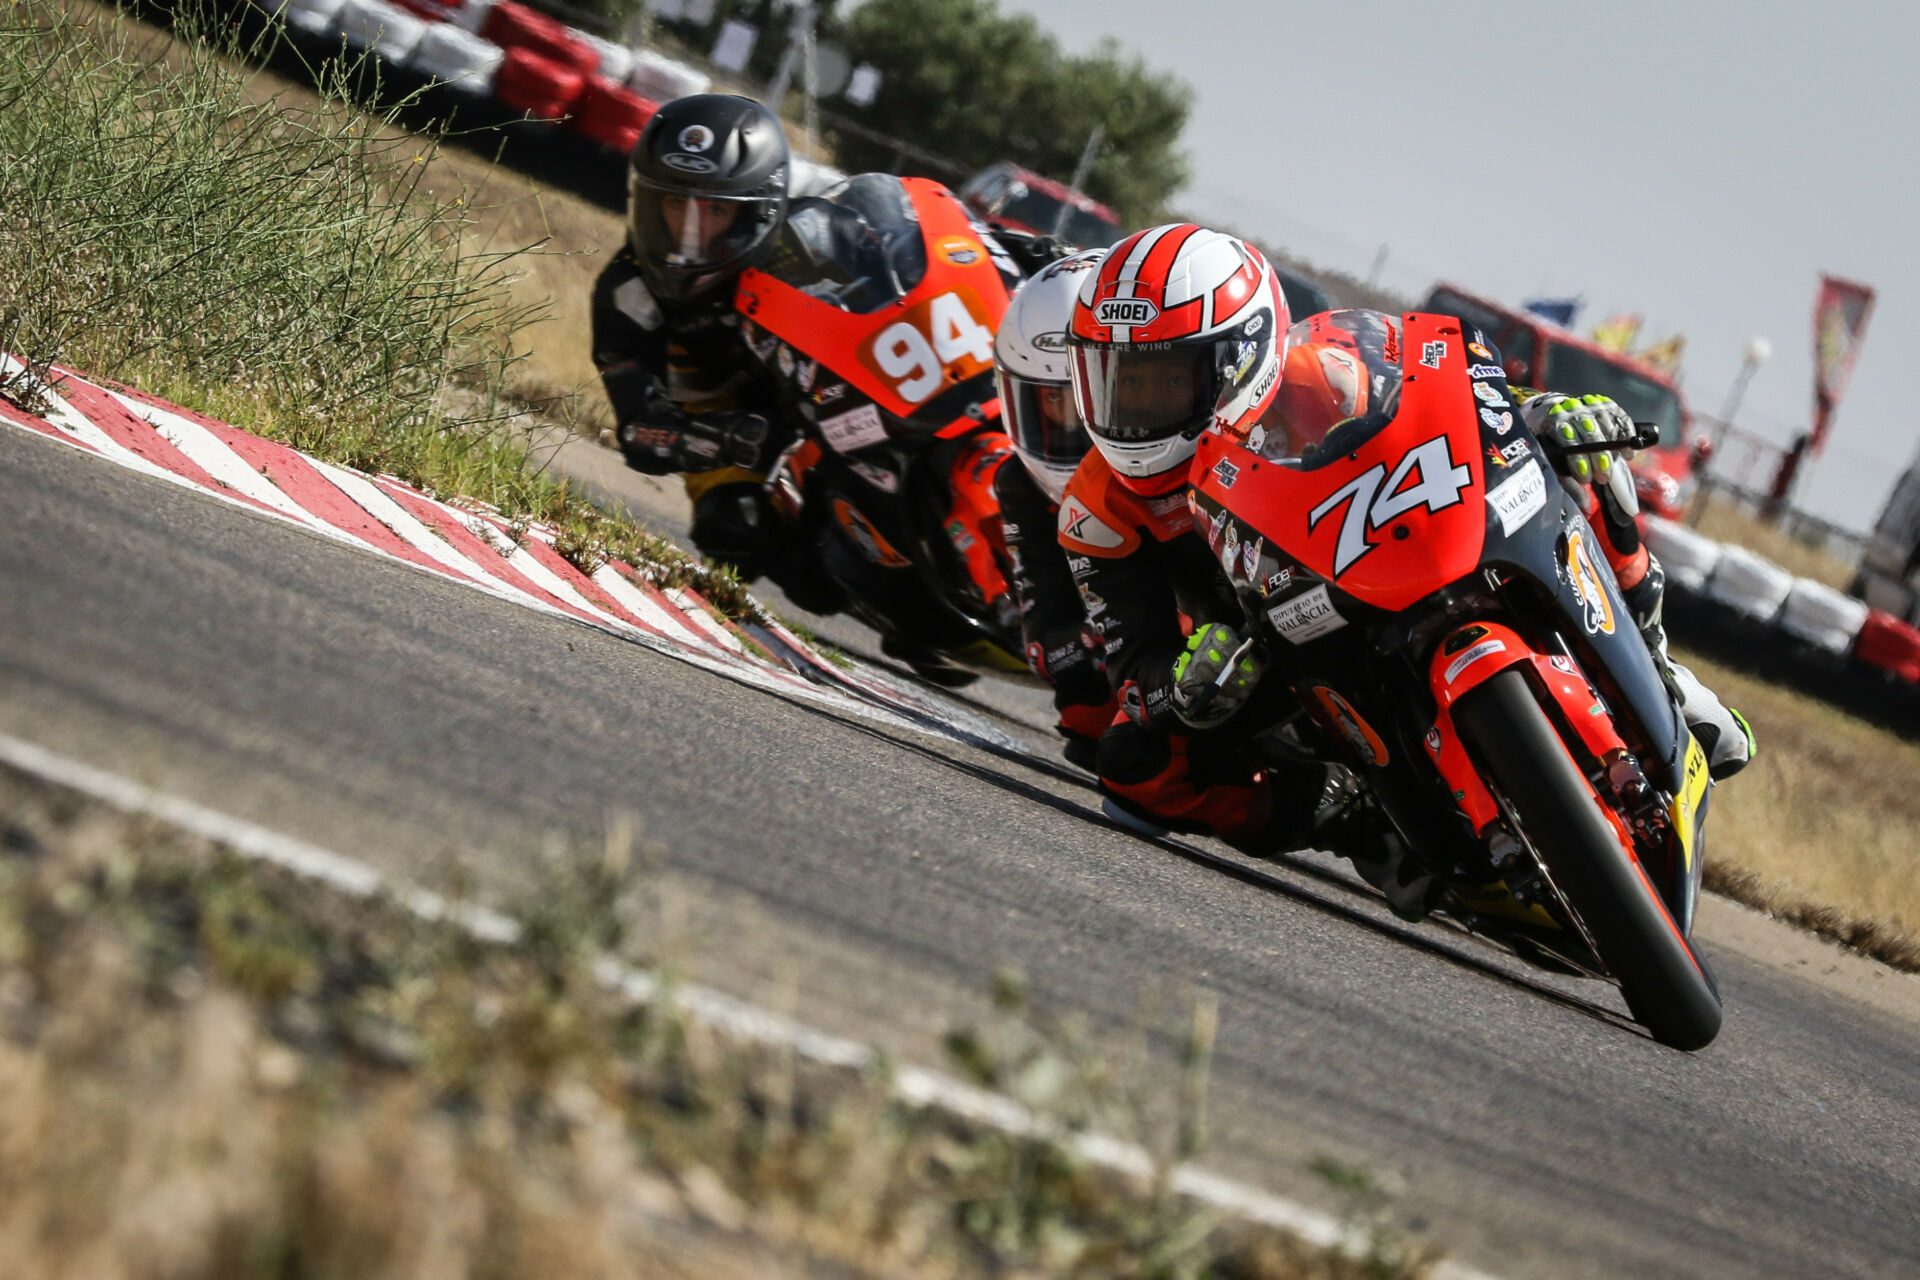 Kensei Matsudaira (74) leading a Moto5 race this past weekend in Spain. Photo by Benaisa Photography.